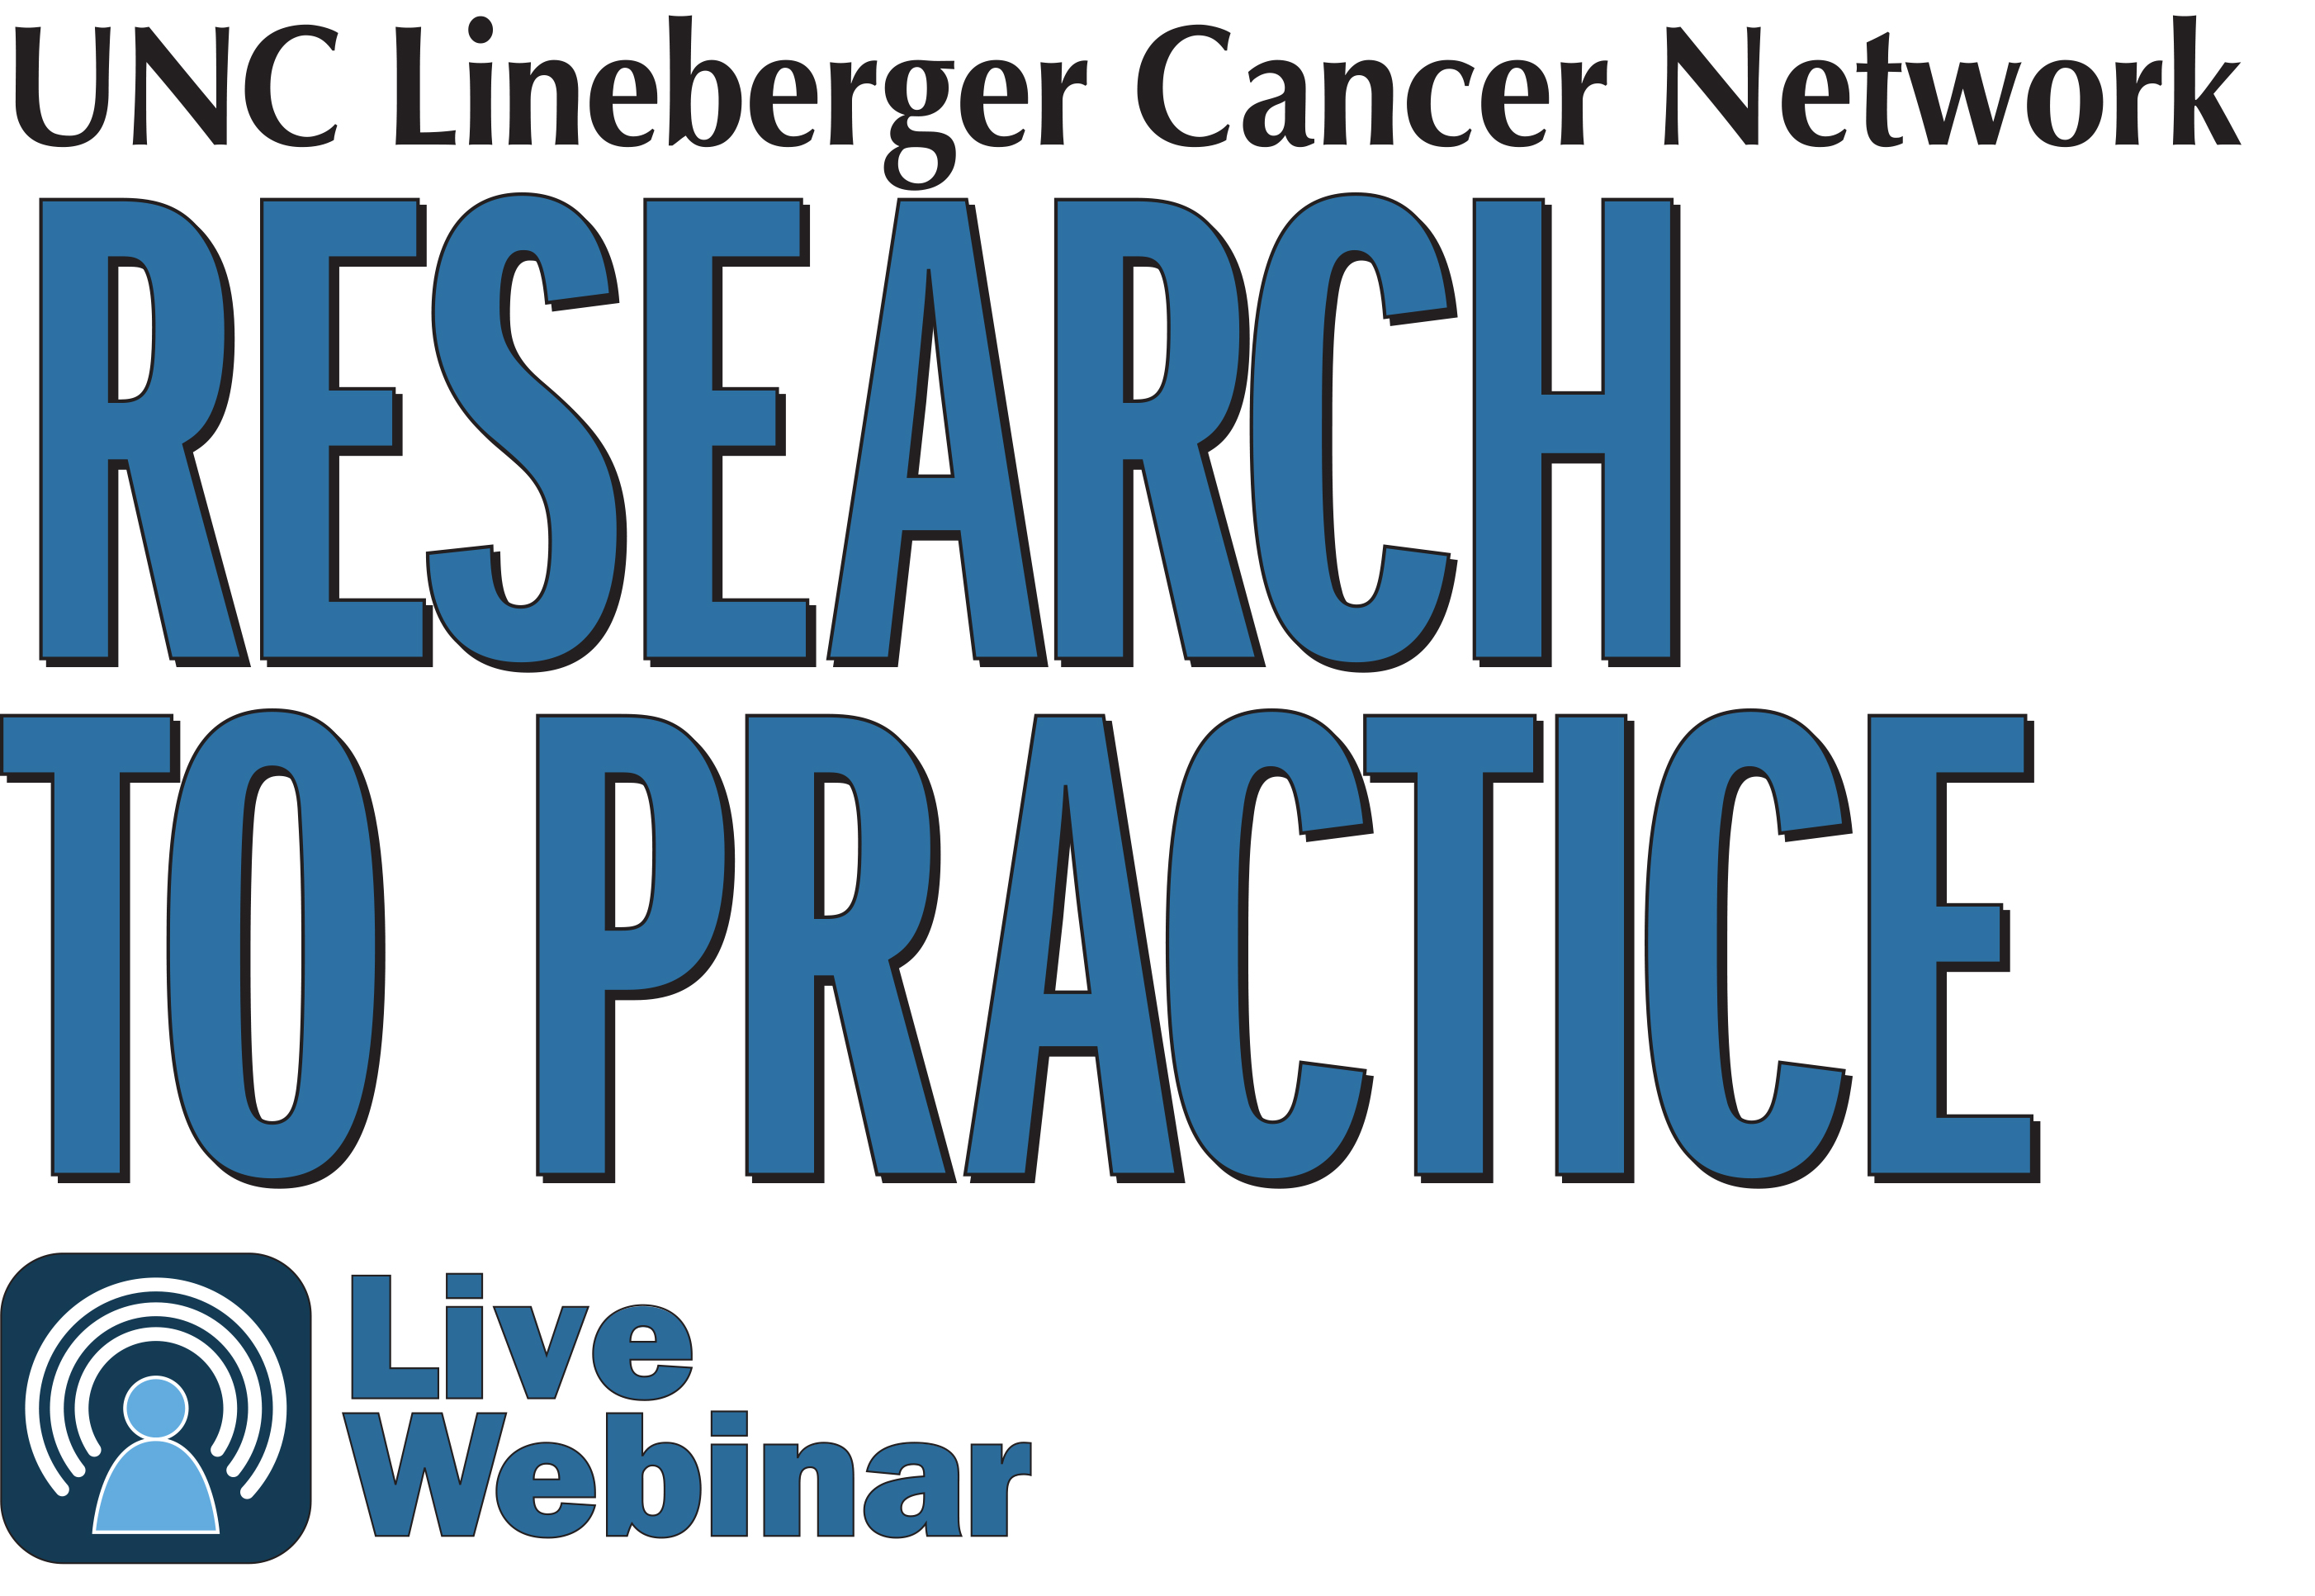 UNCLCN Presents a Research to Practice Webinar